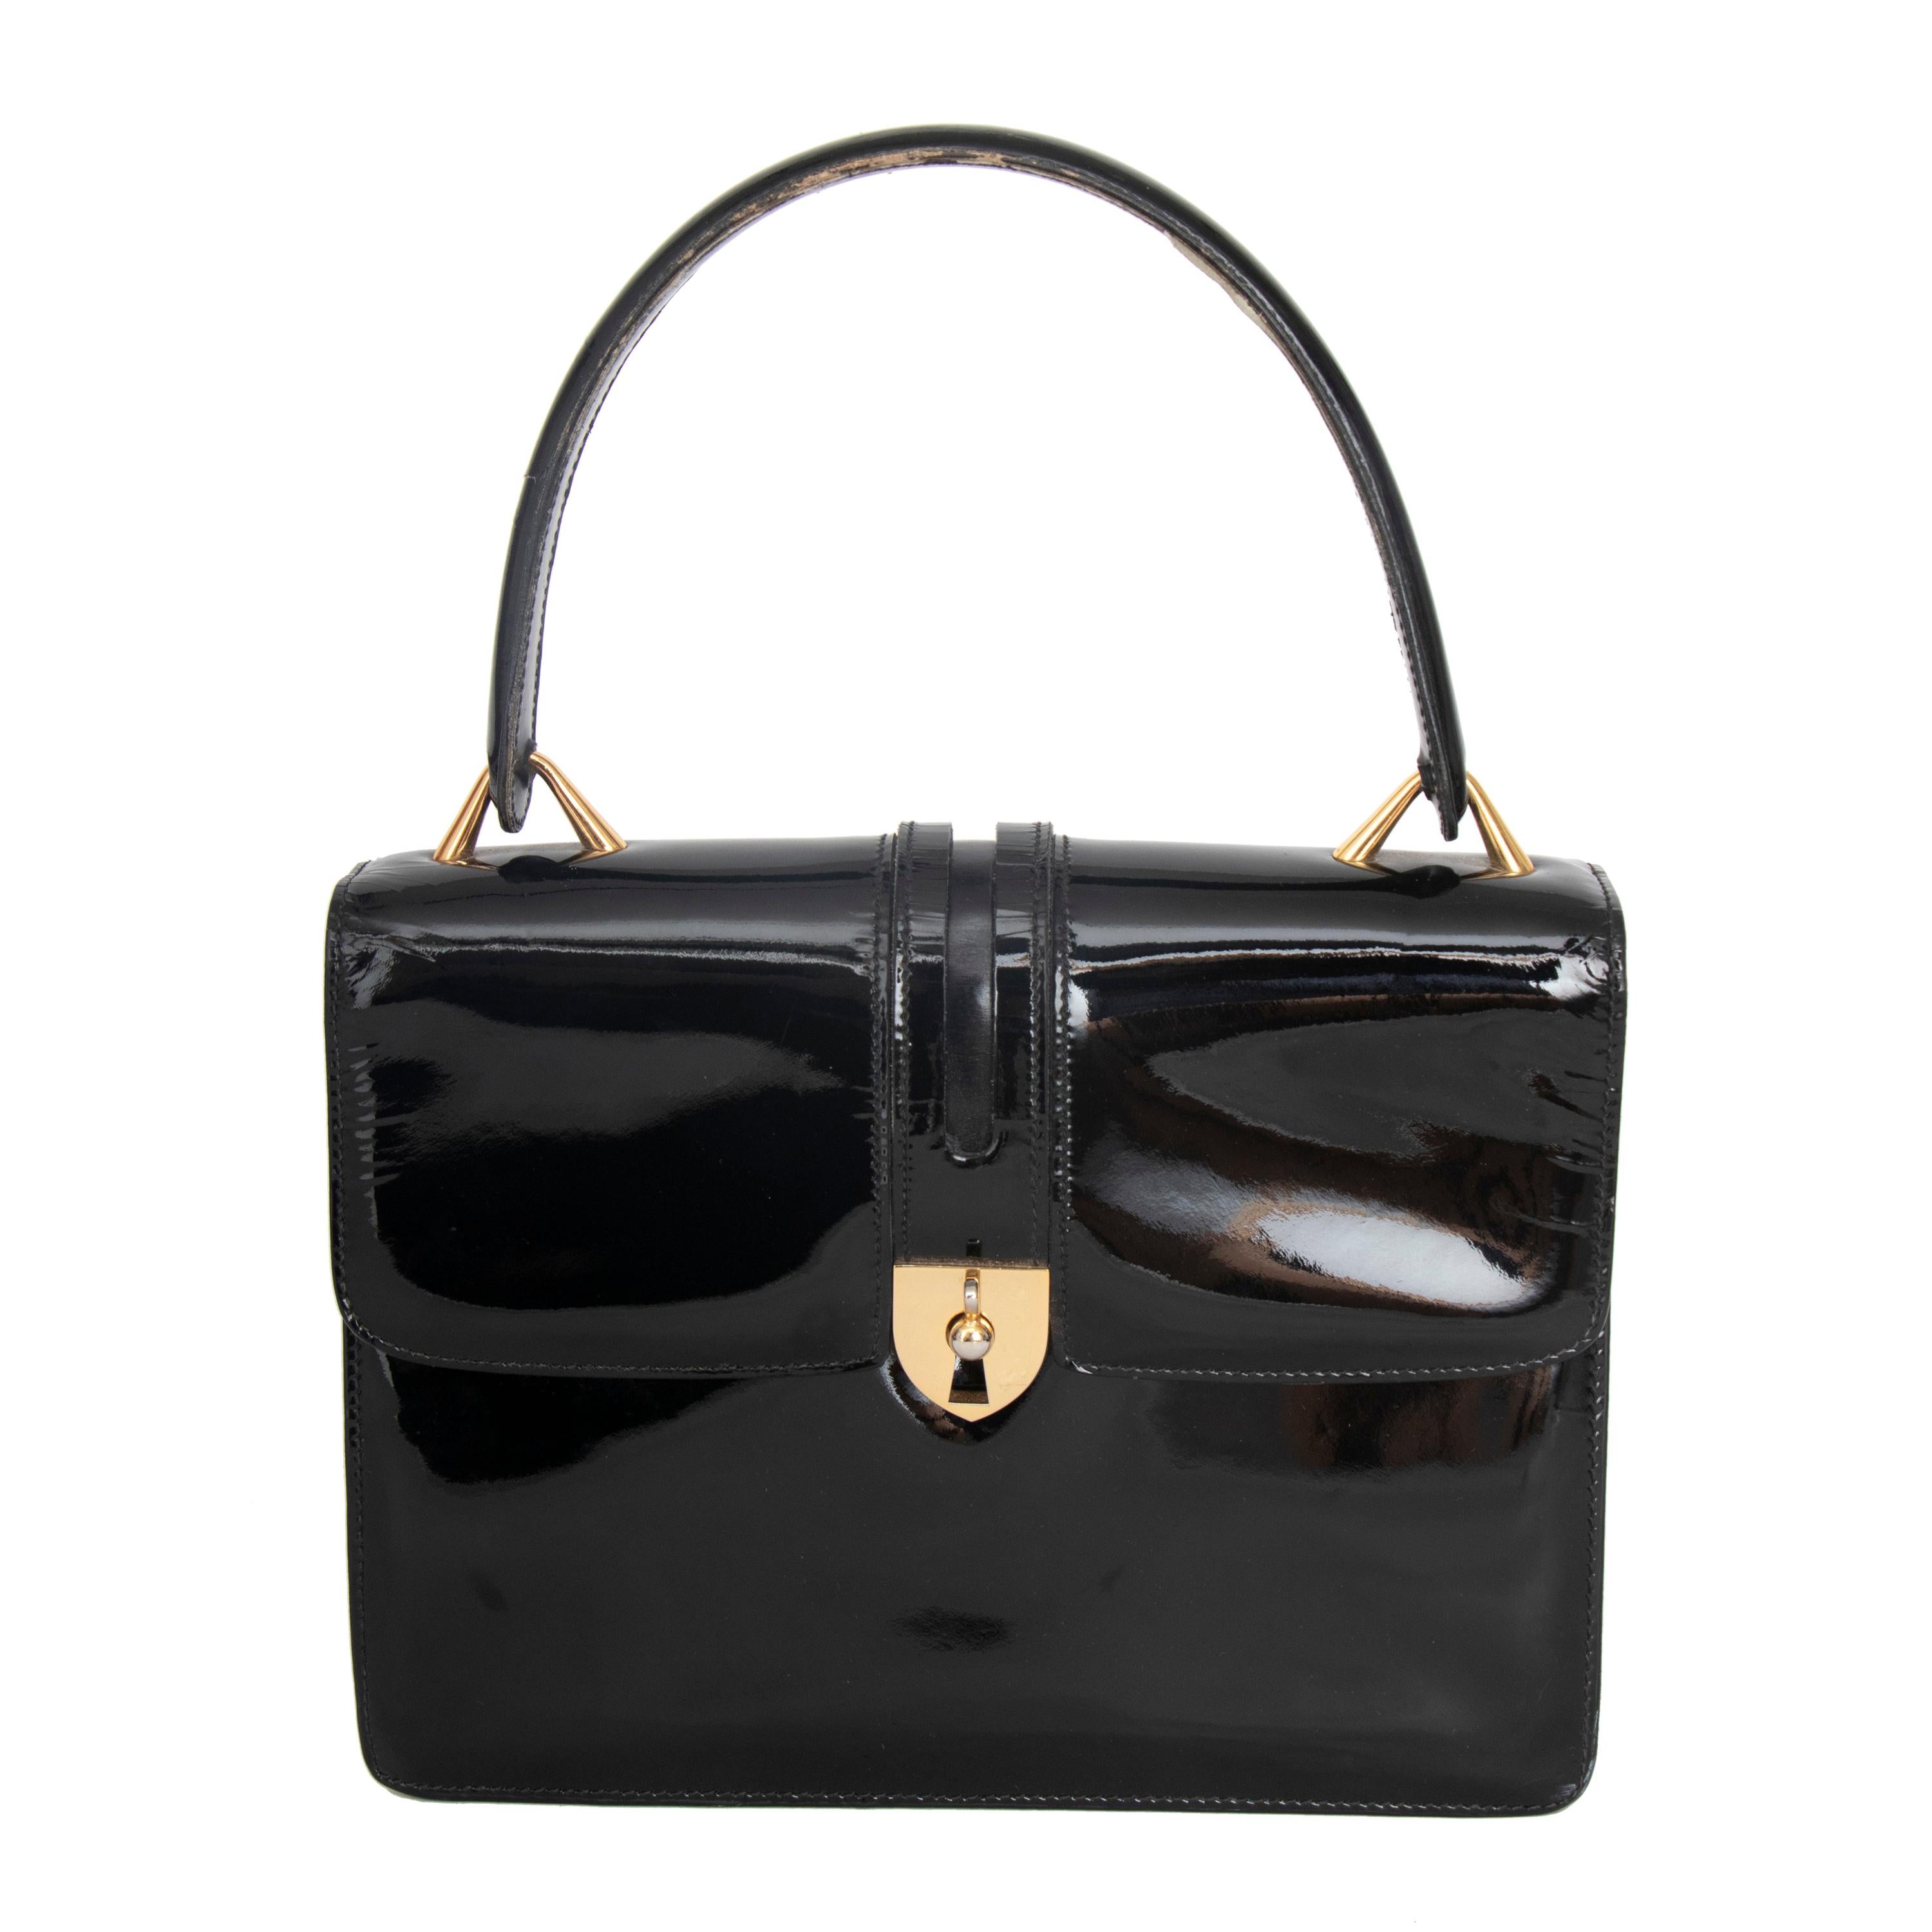 A 1960s Vintage Gucci Black Patent Leather Handbag with Gold Hardware For Sale